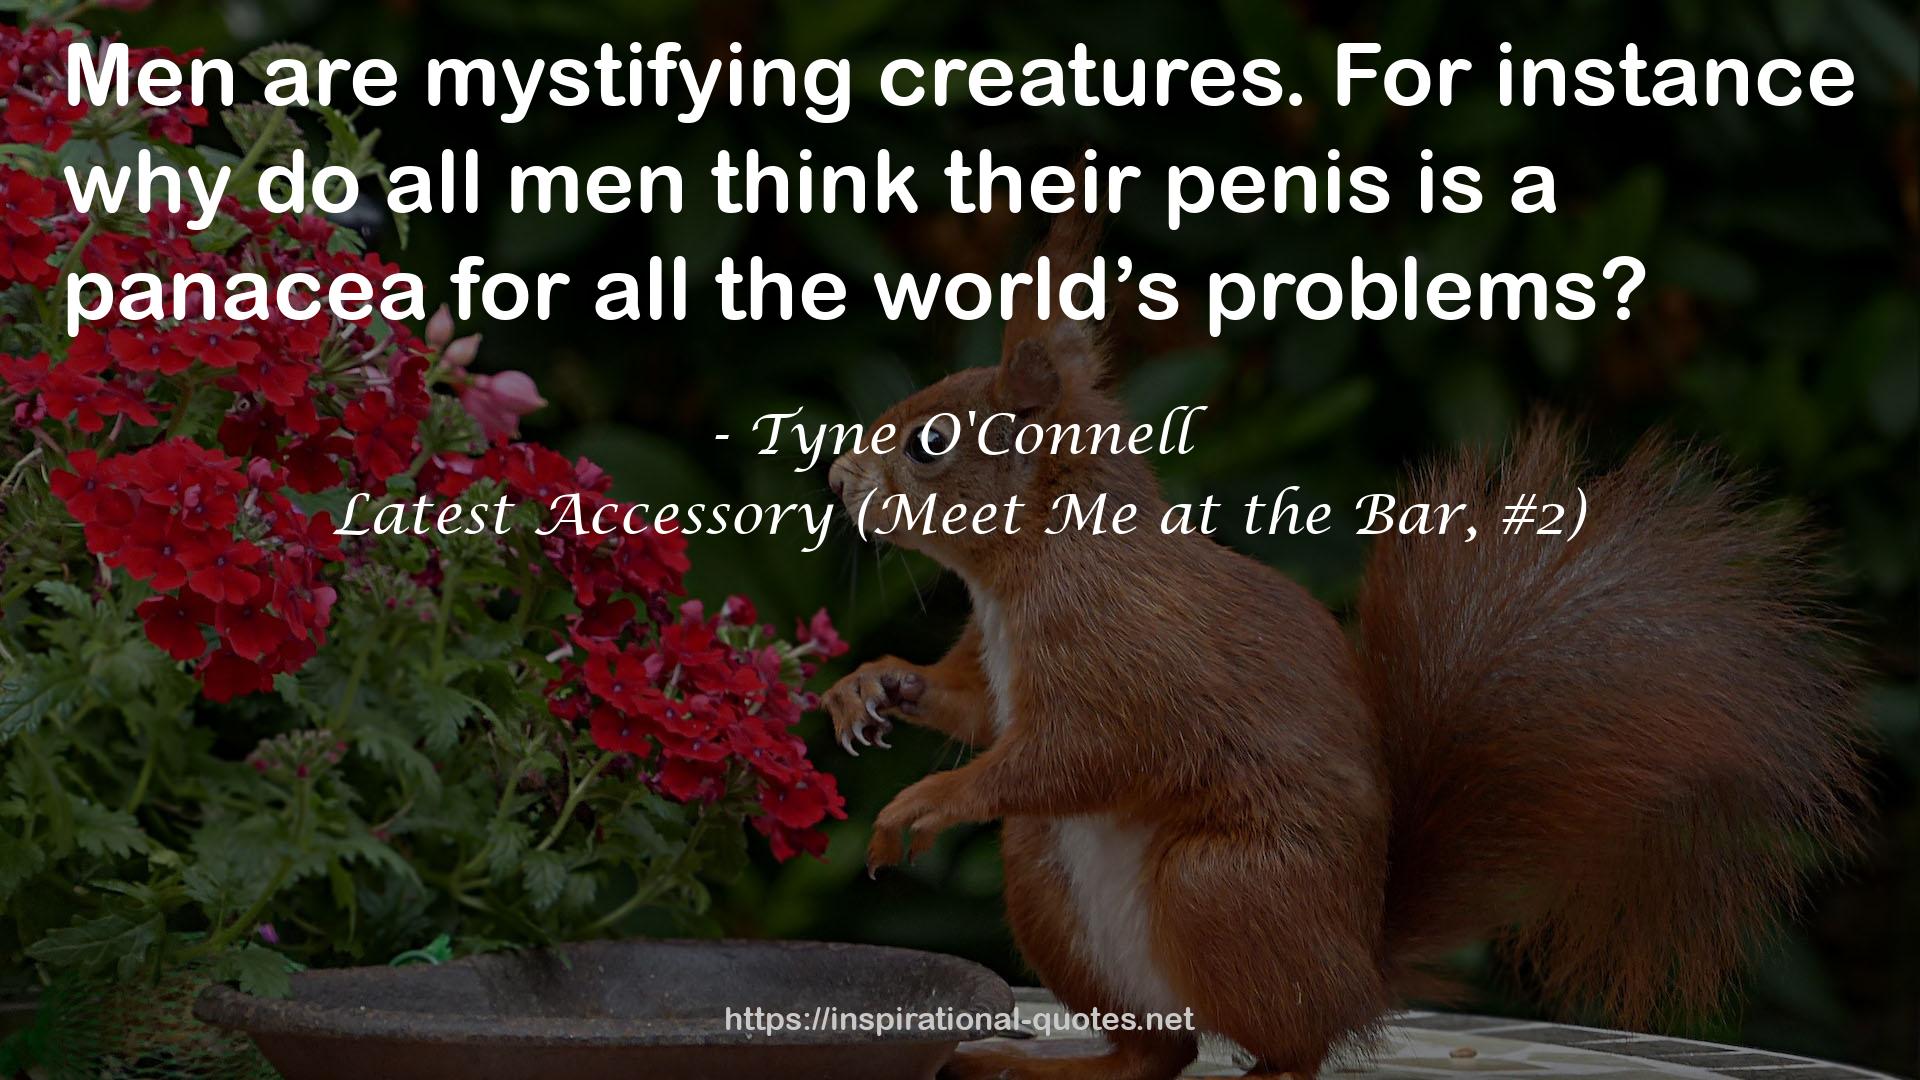 Tyne O'Connell QUOTES